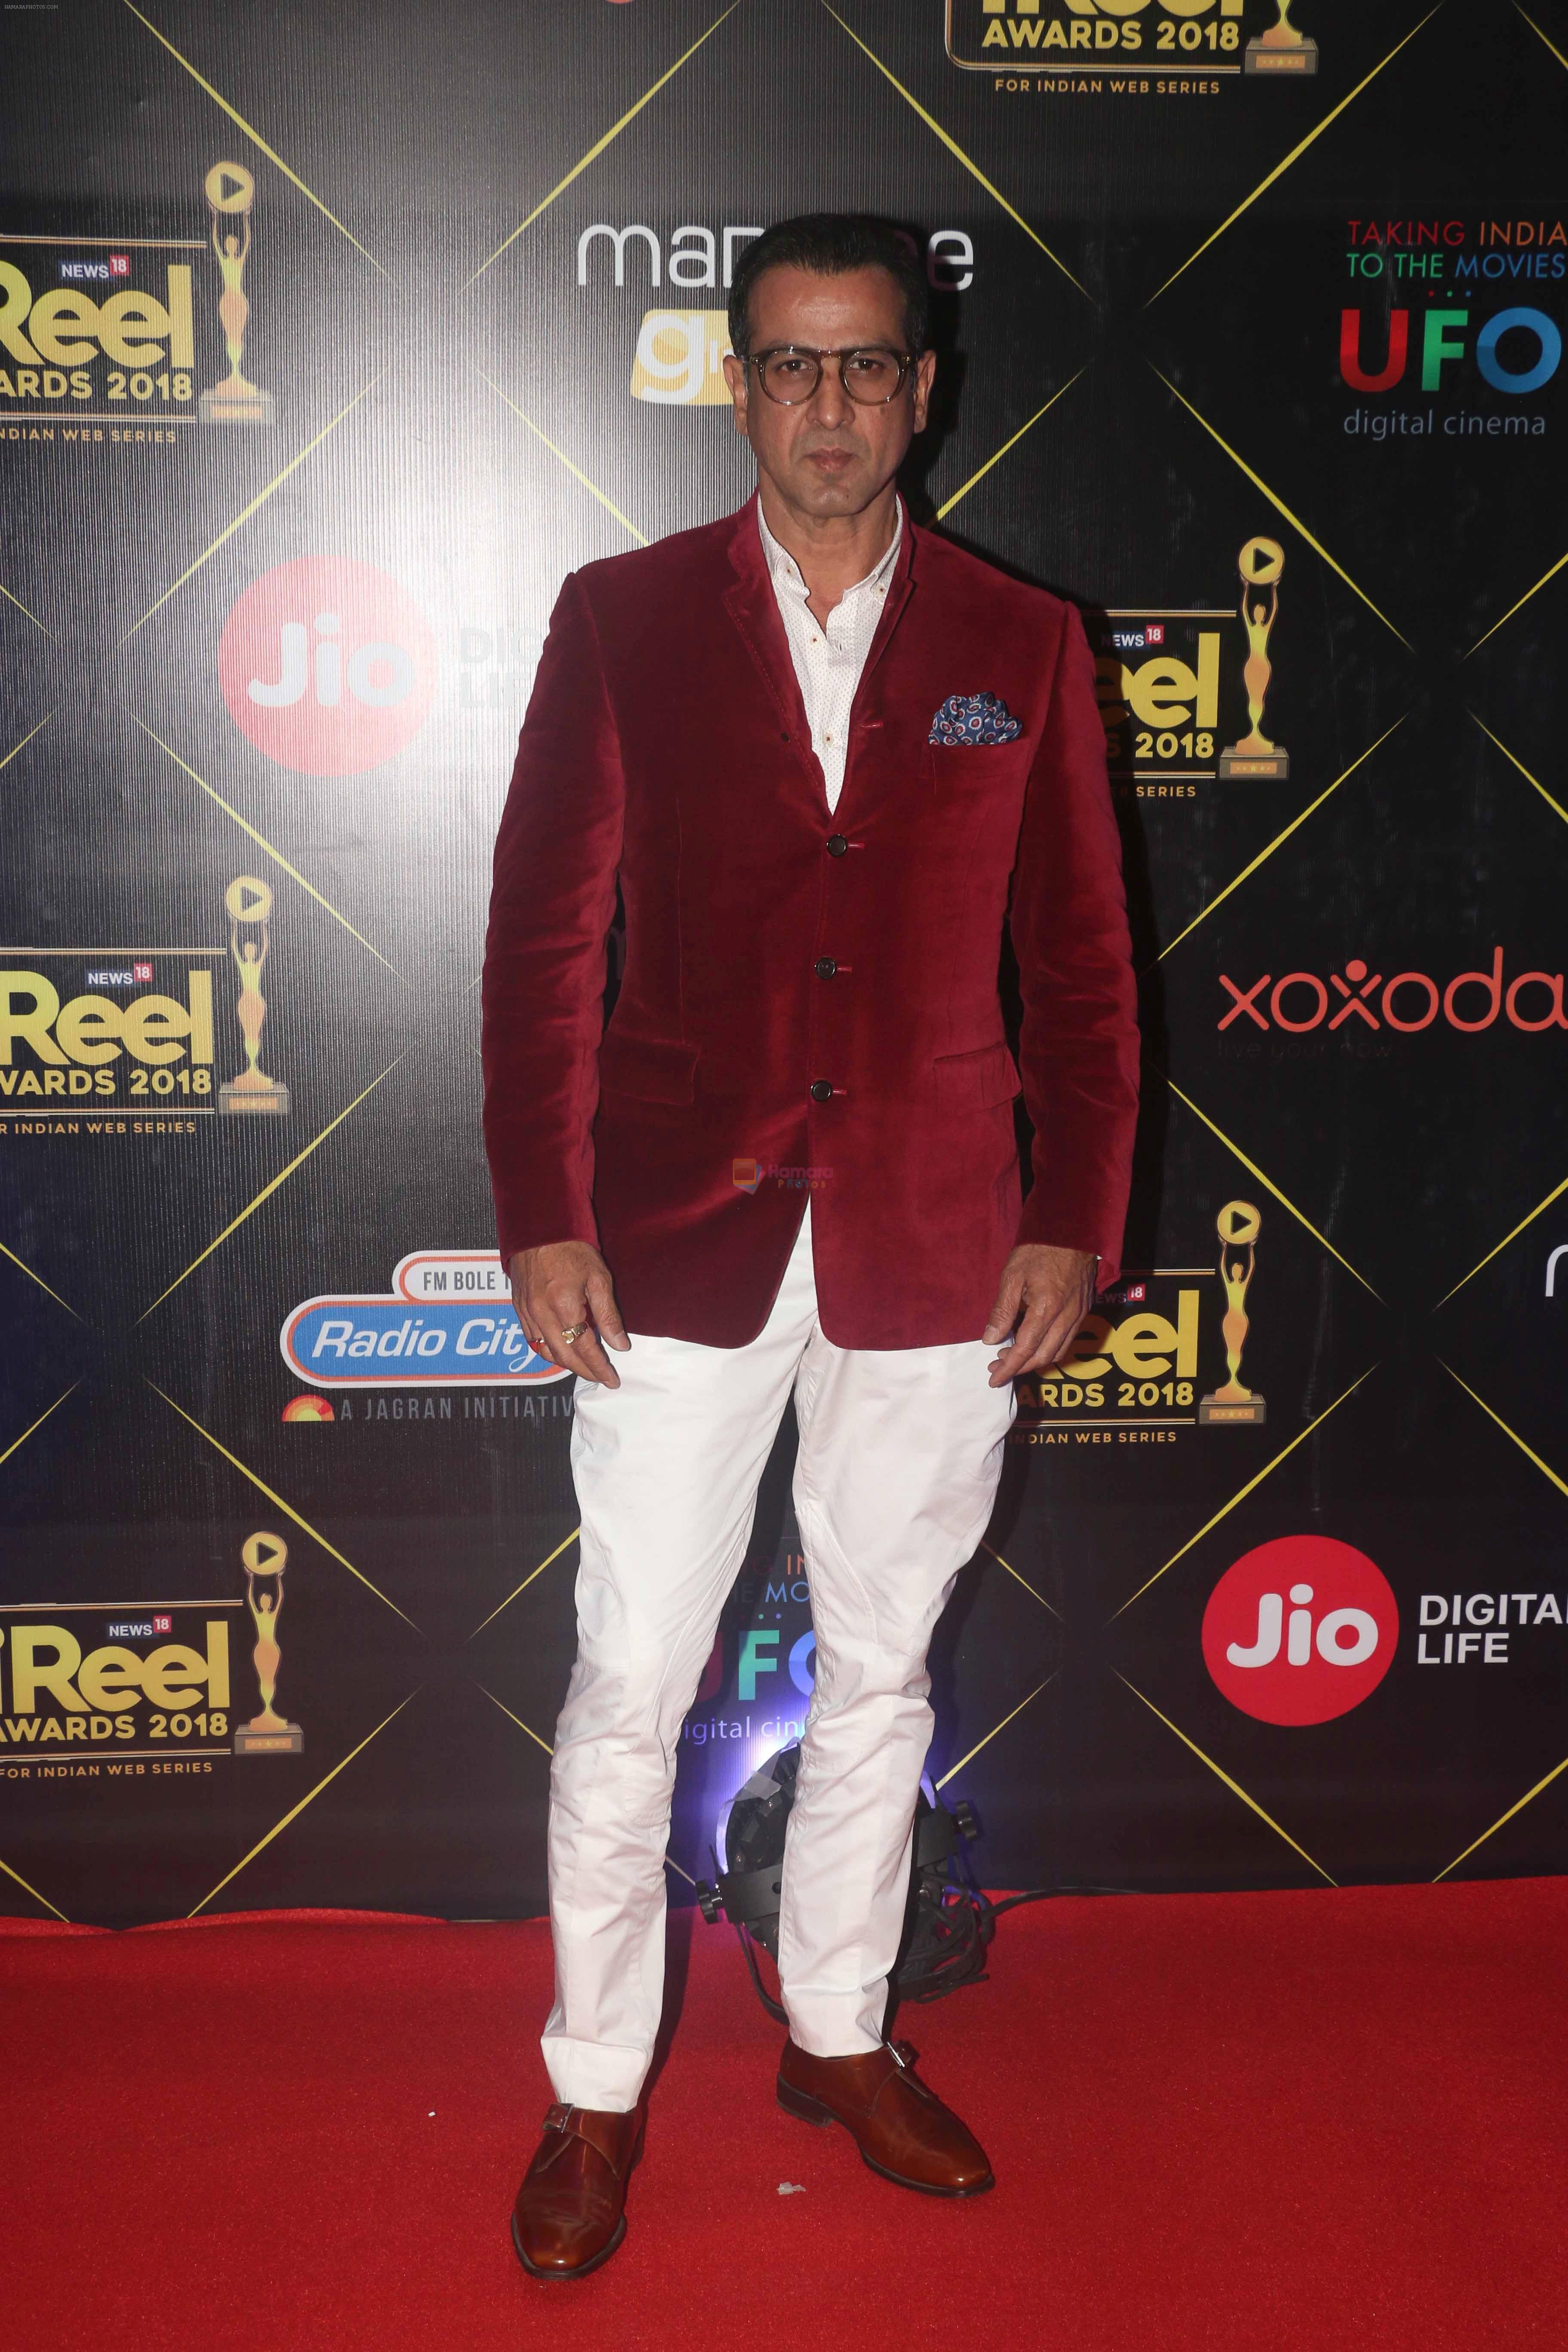 Ronit Roy at Red Carpet of IReel Awards on 6th Sept 2018